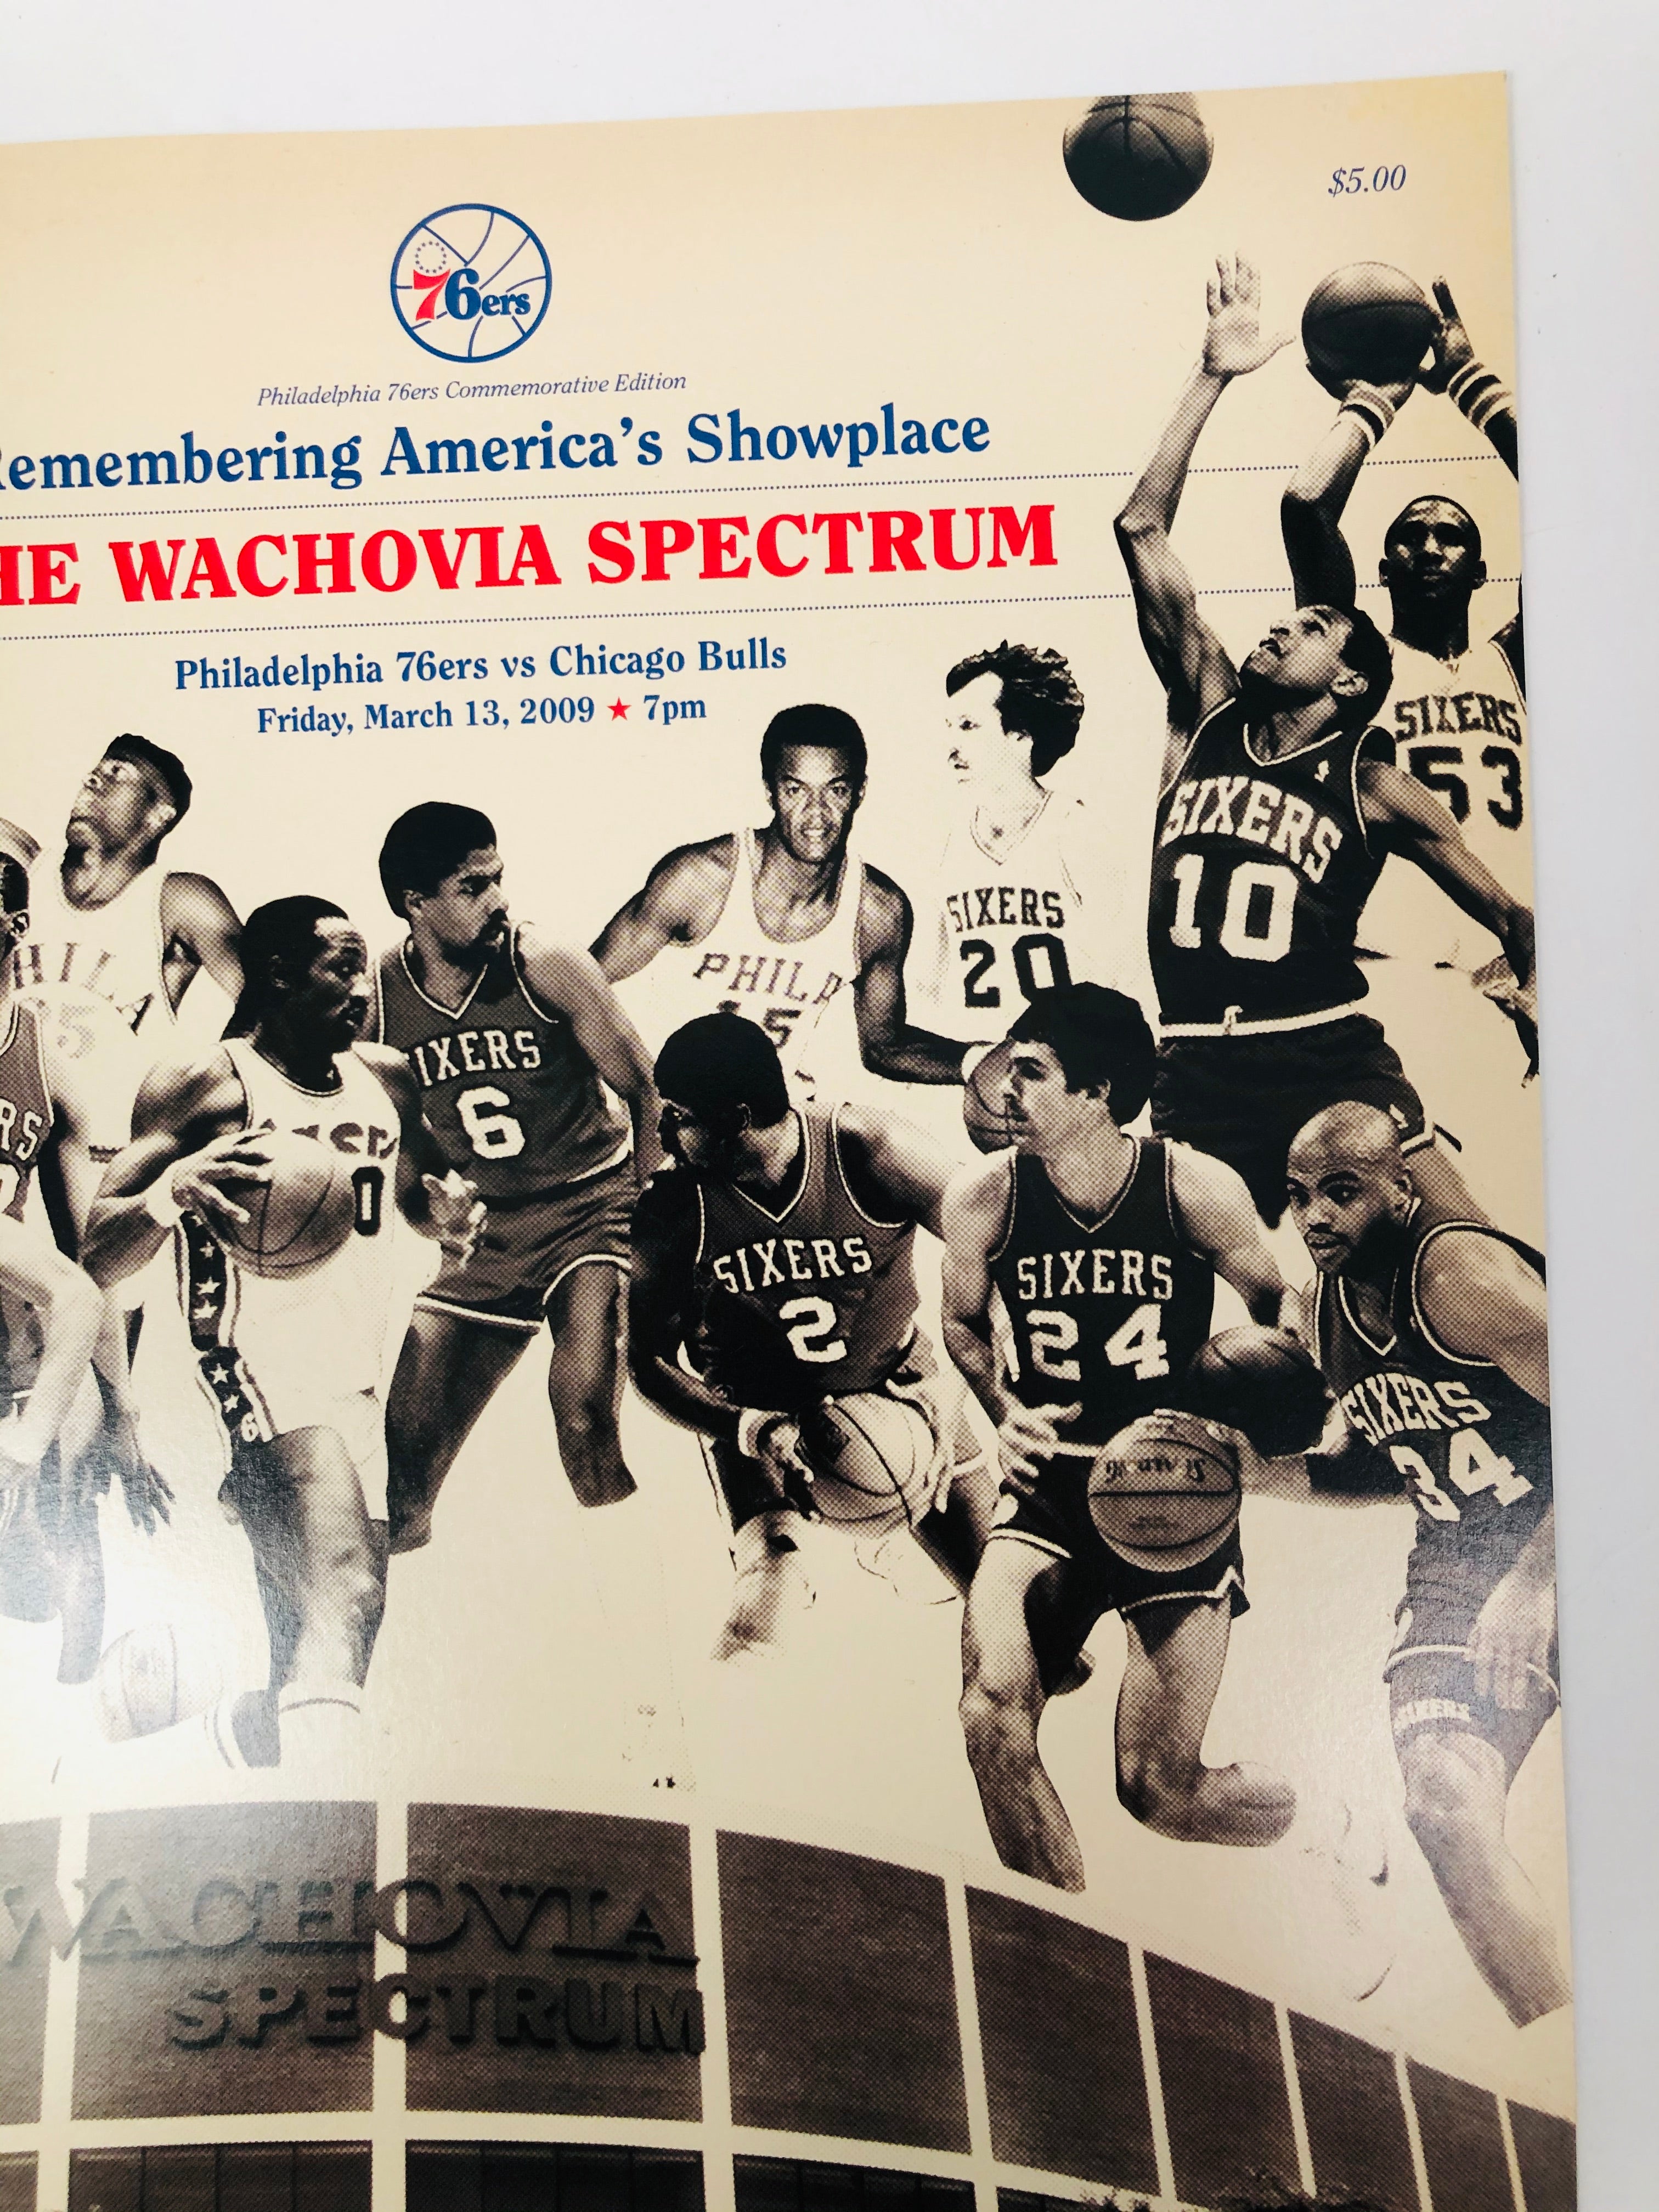 Last #sixers game at #spectrum poster #2009 #bcbc